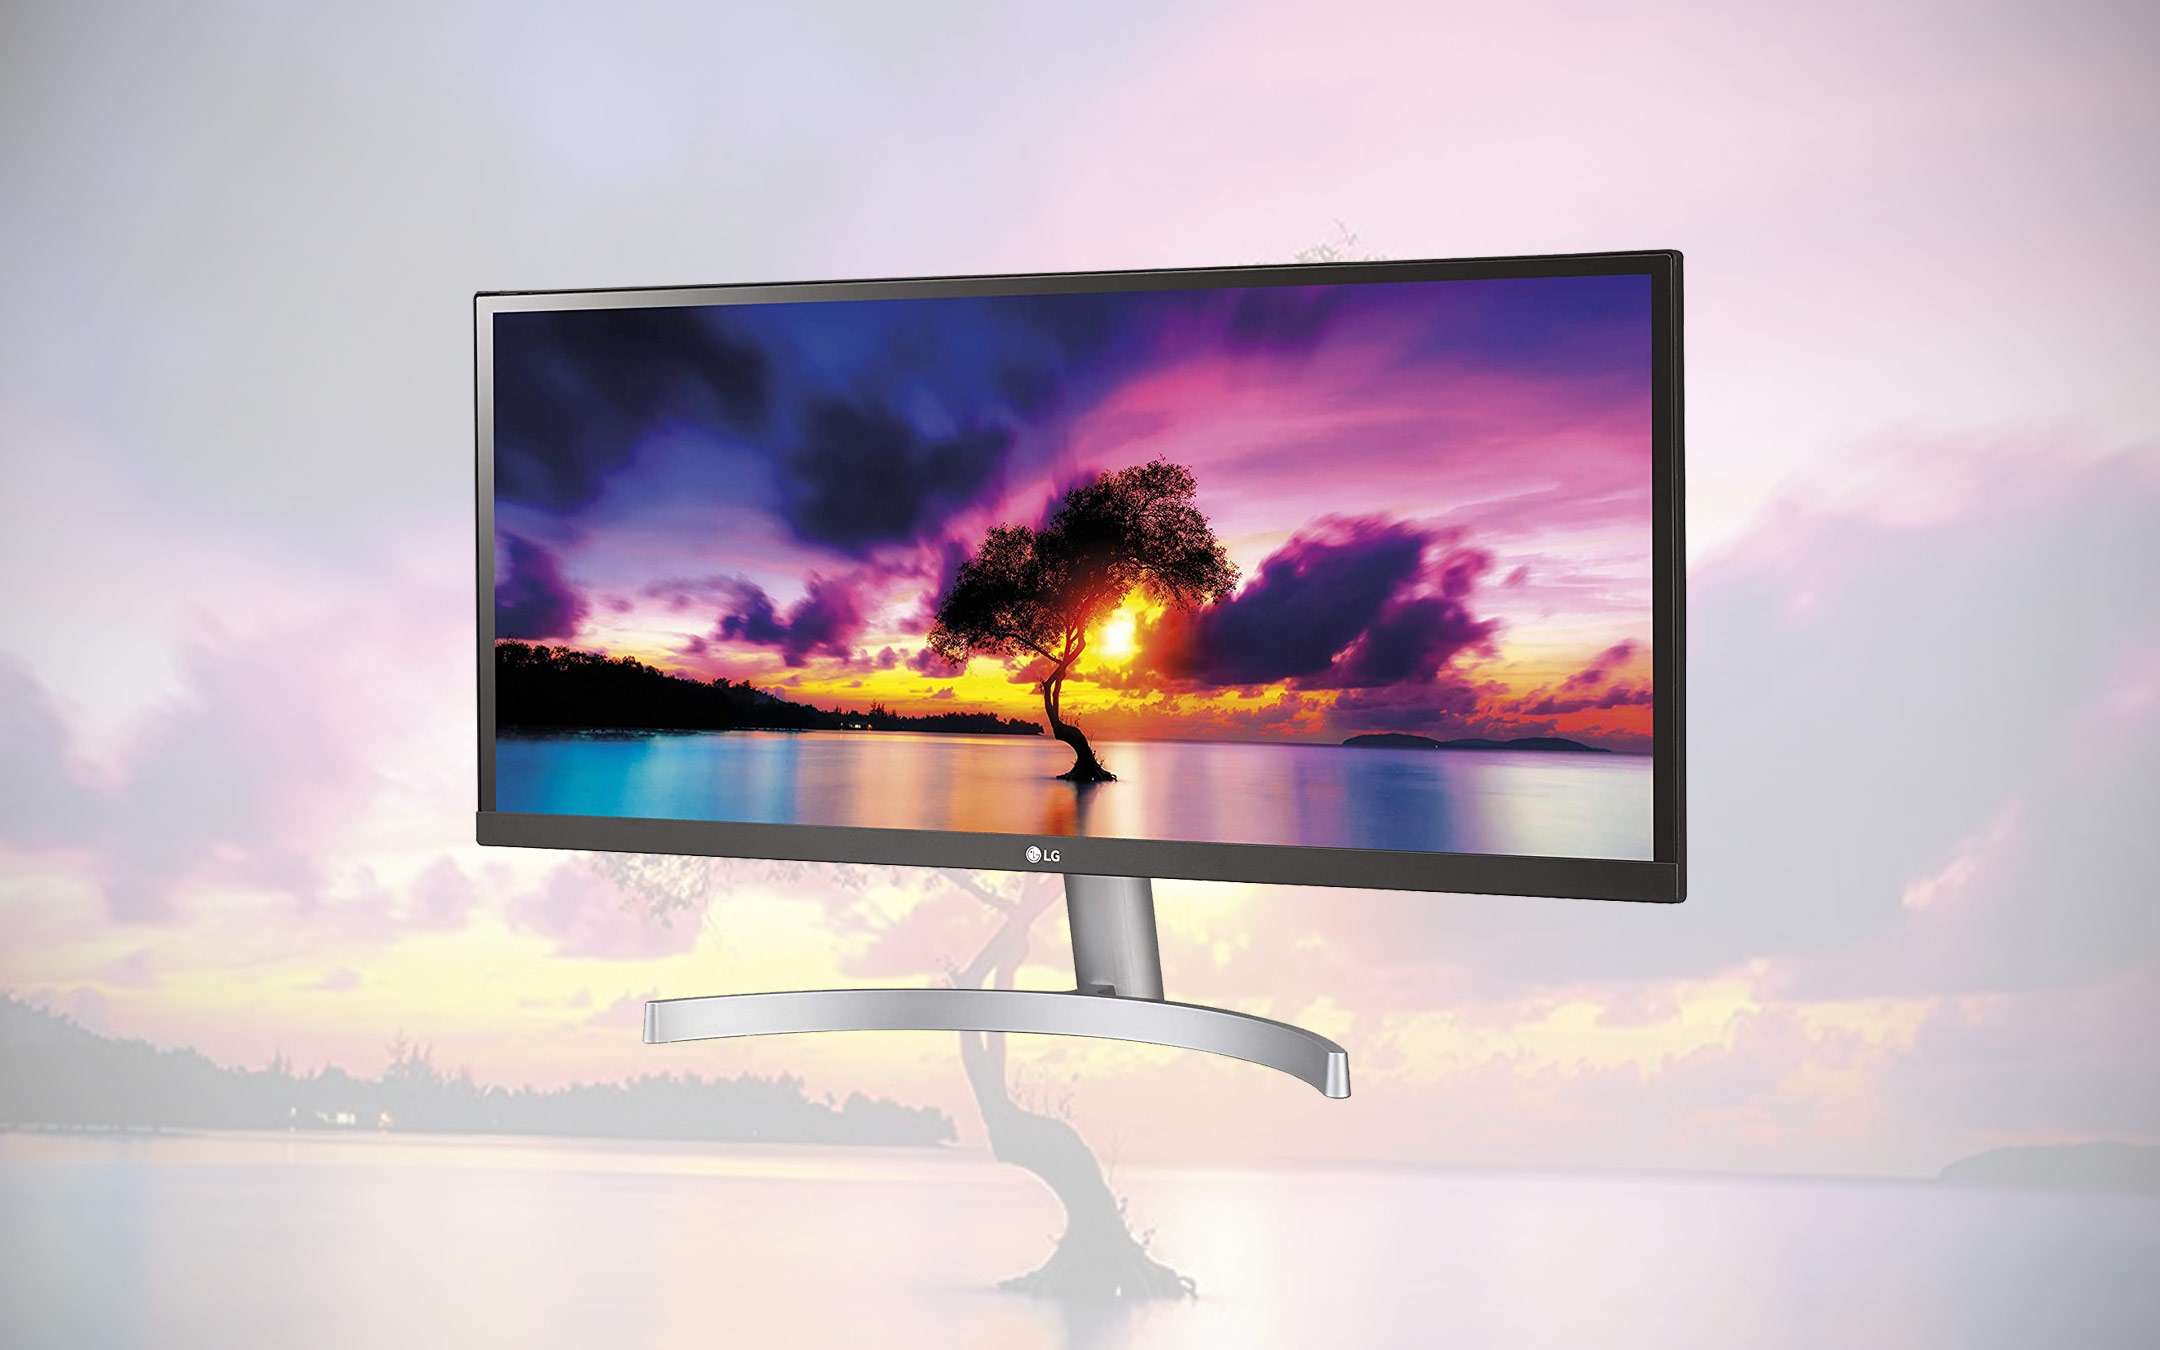 LG ultrawide 29 inch monitor on offer at -33%